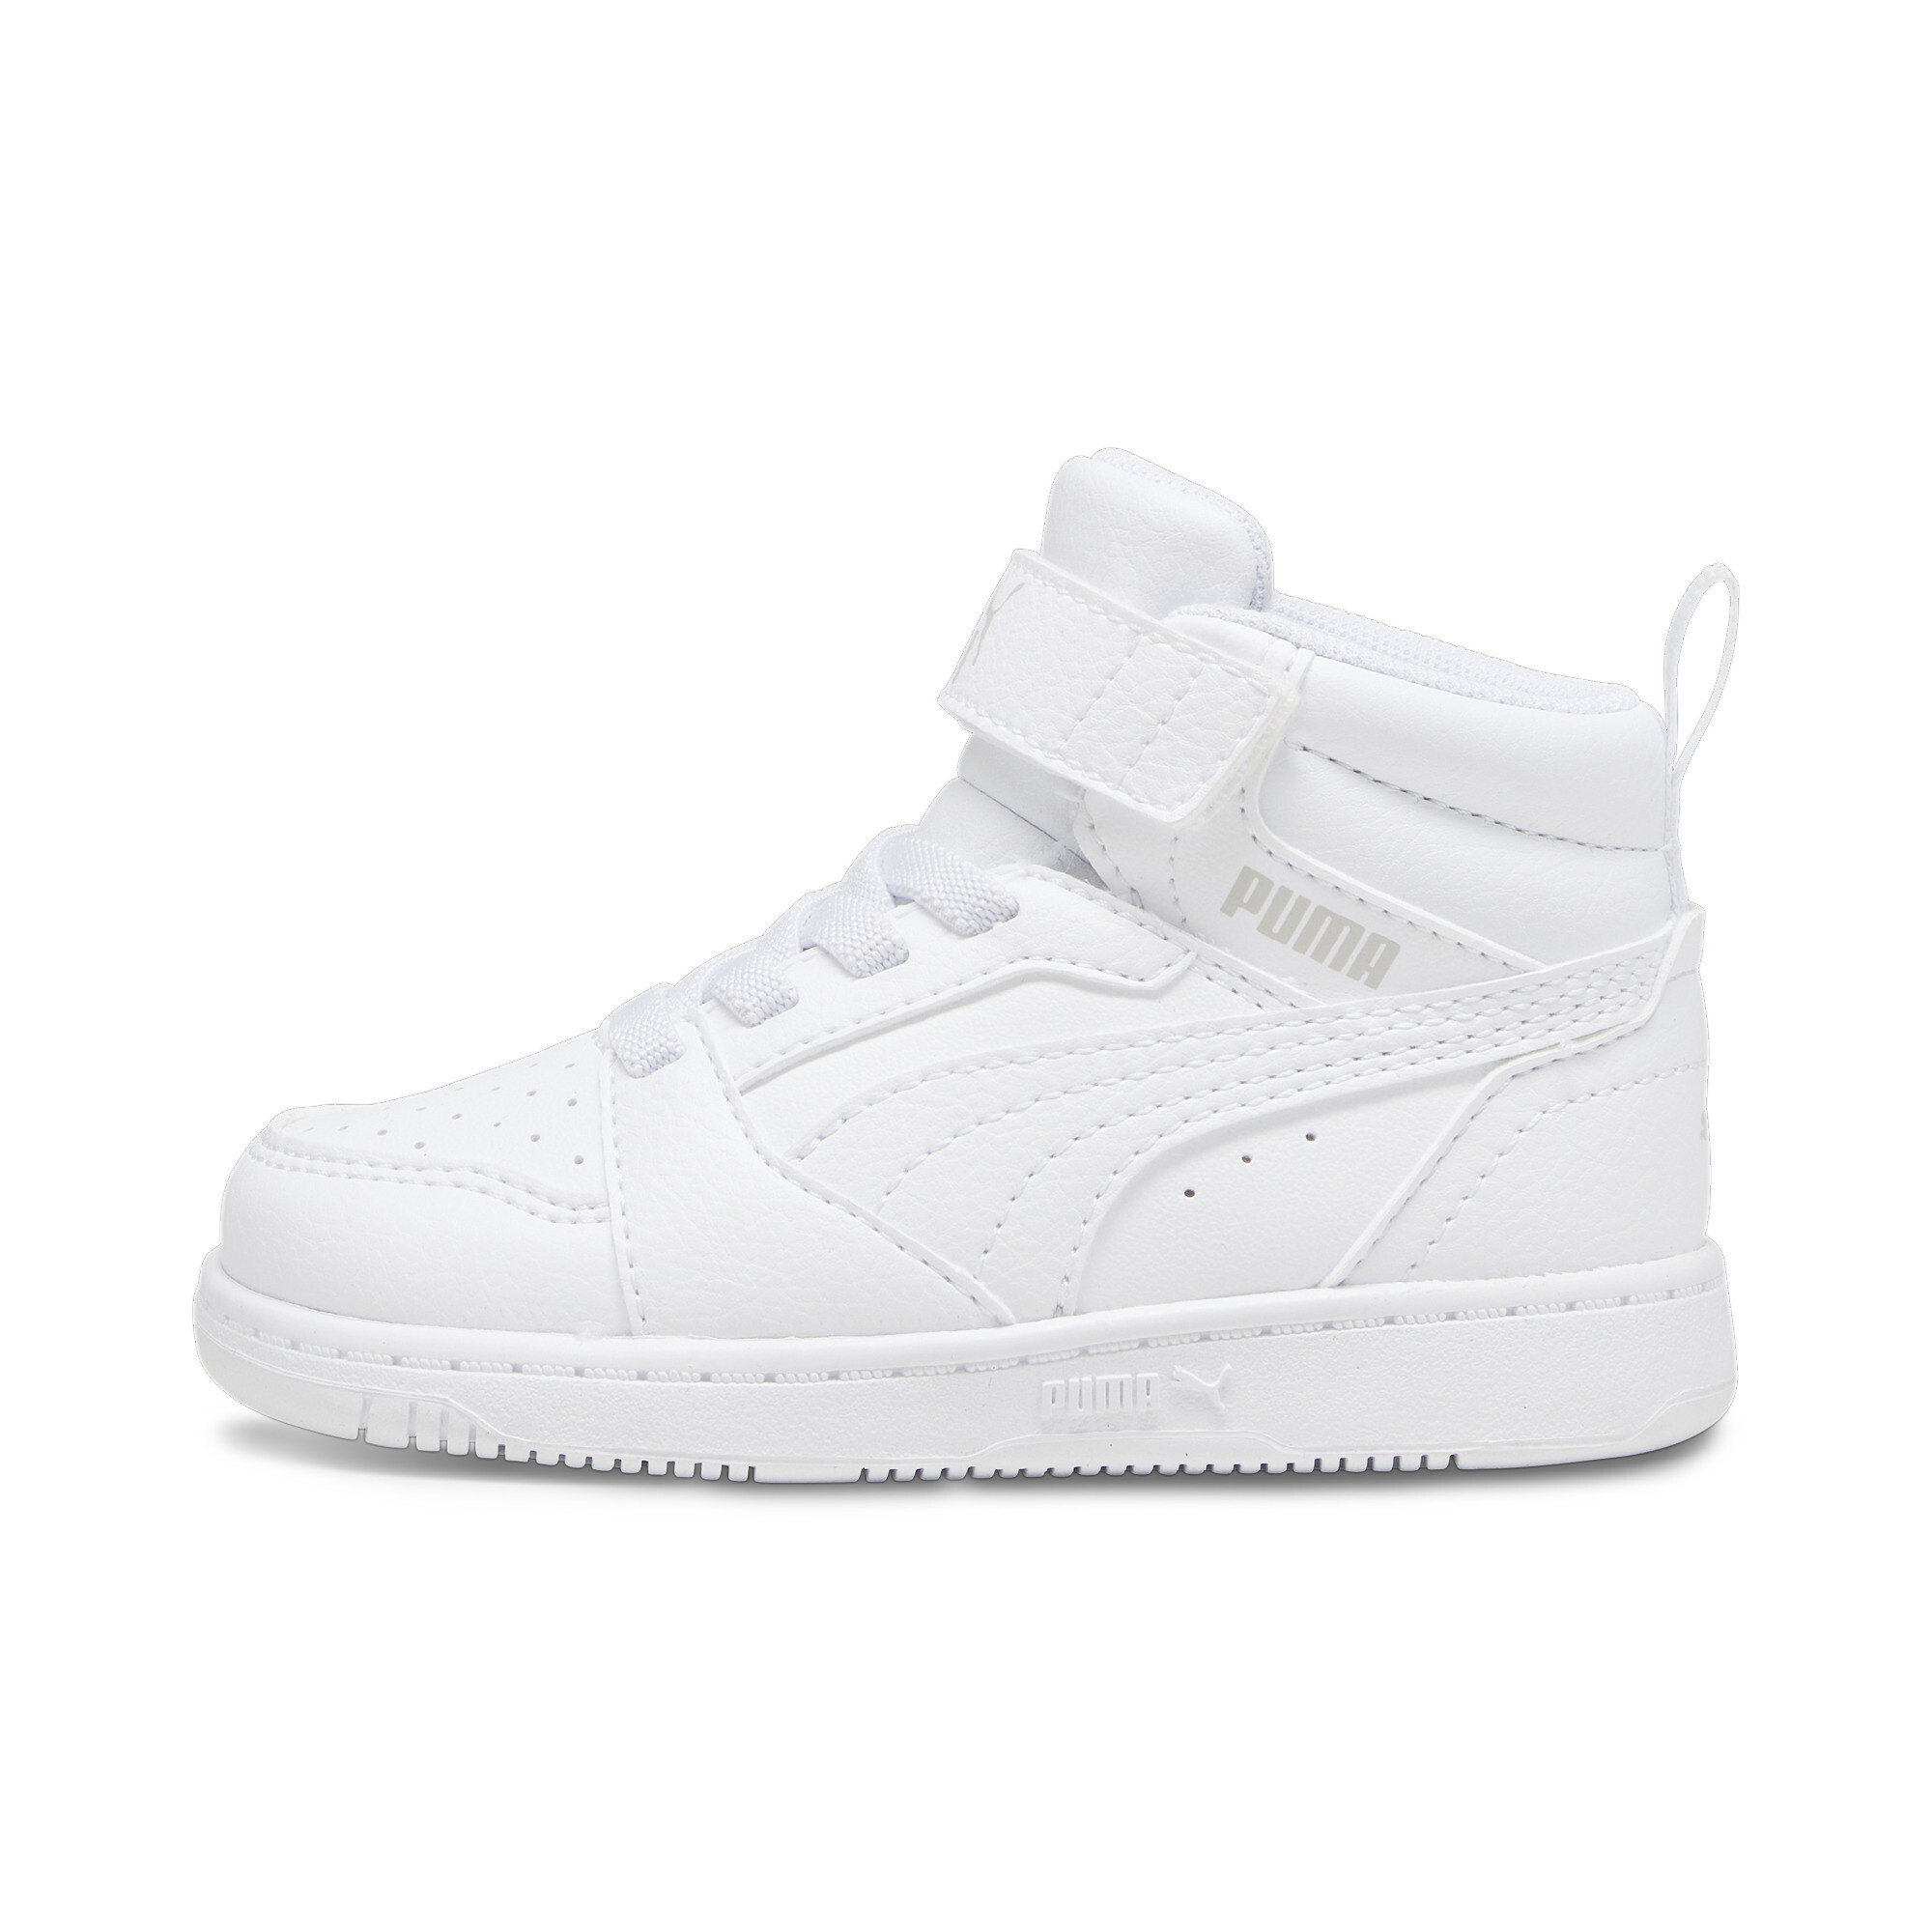 Puma Rebound V6 Mid Toddlers' Sneakers, White, Size 23, Shoes